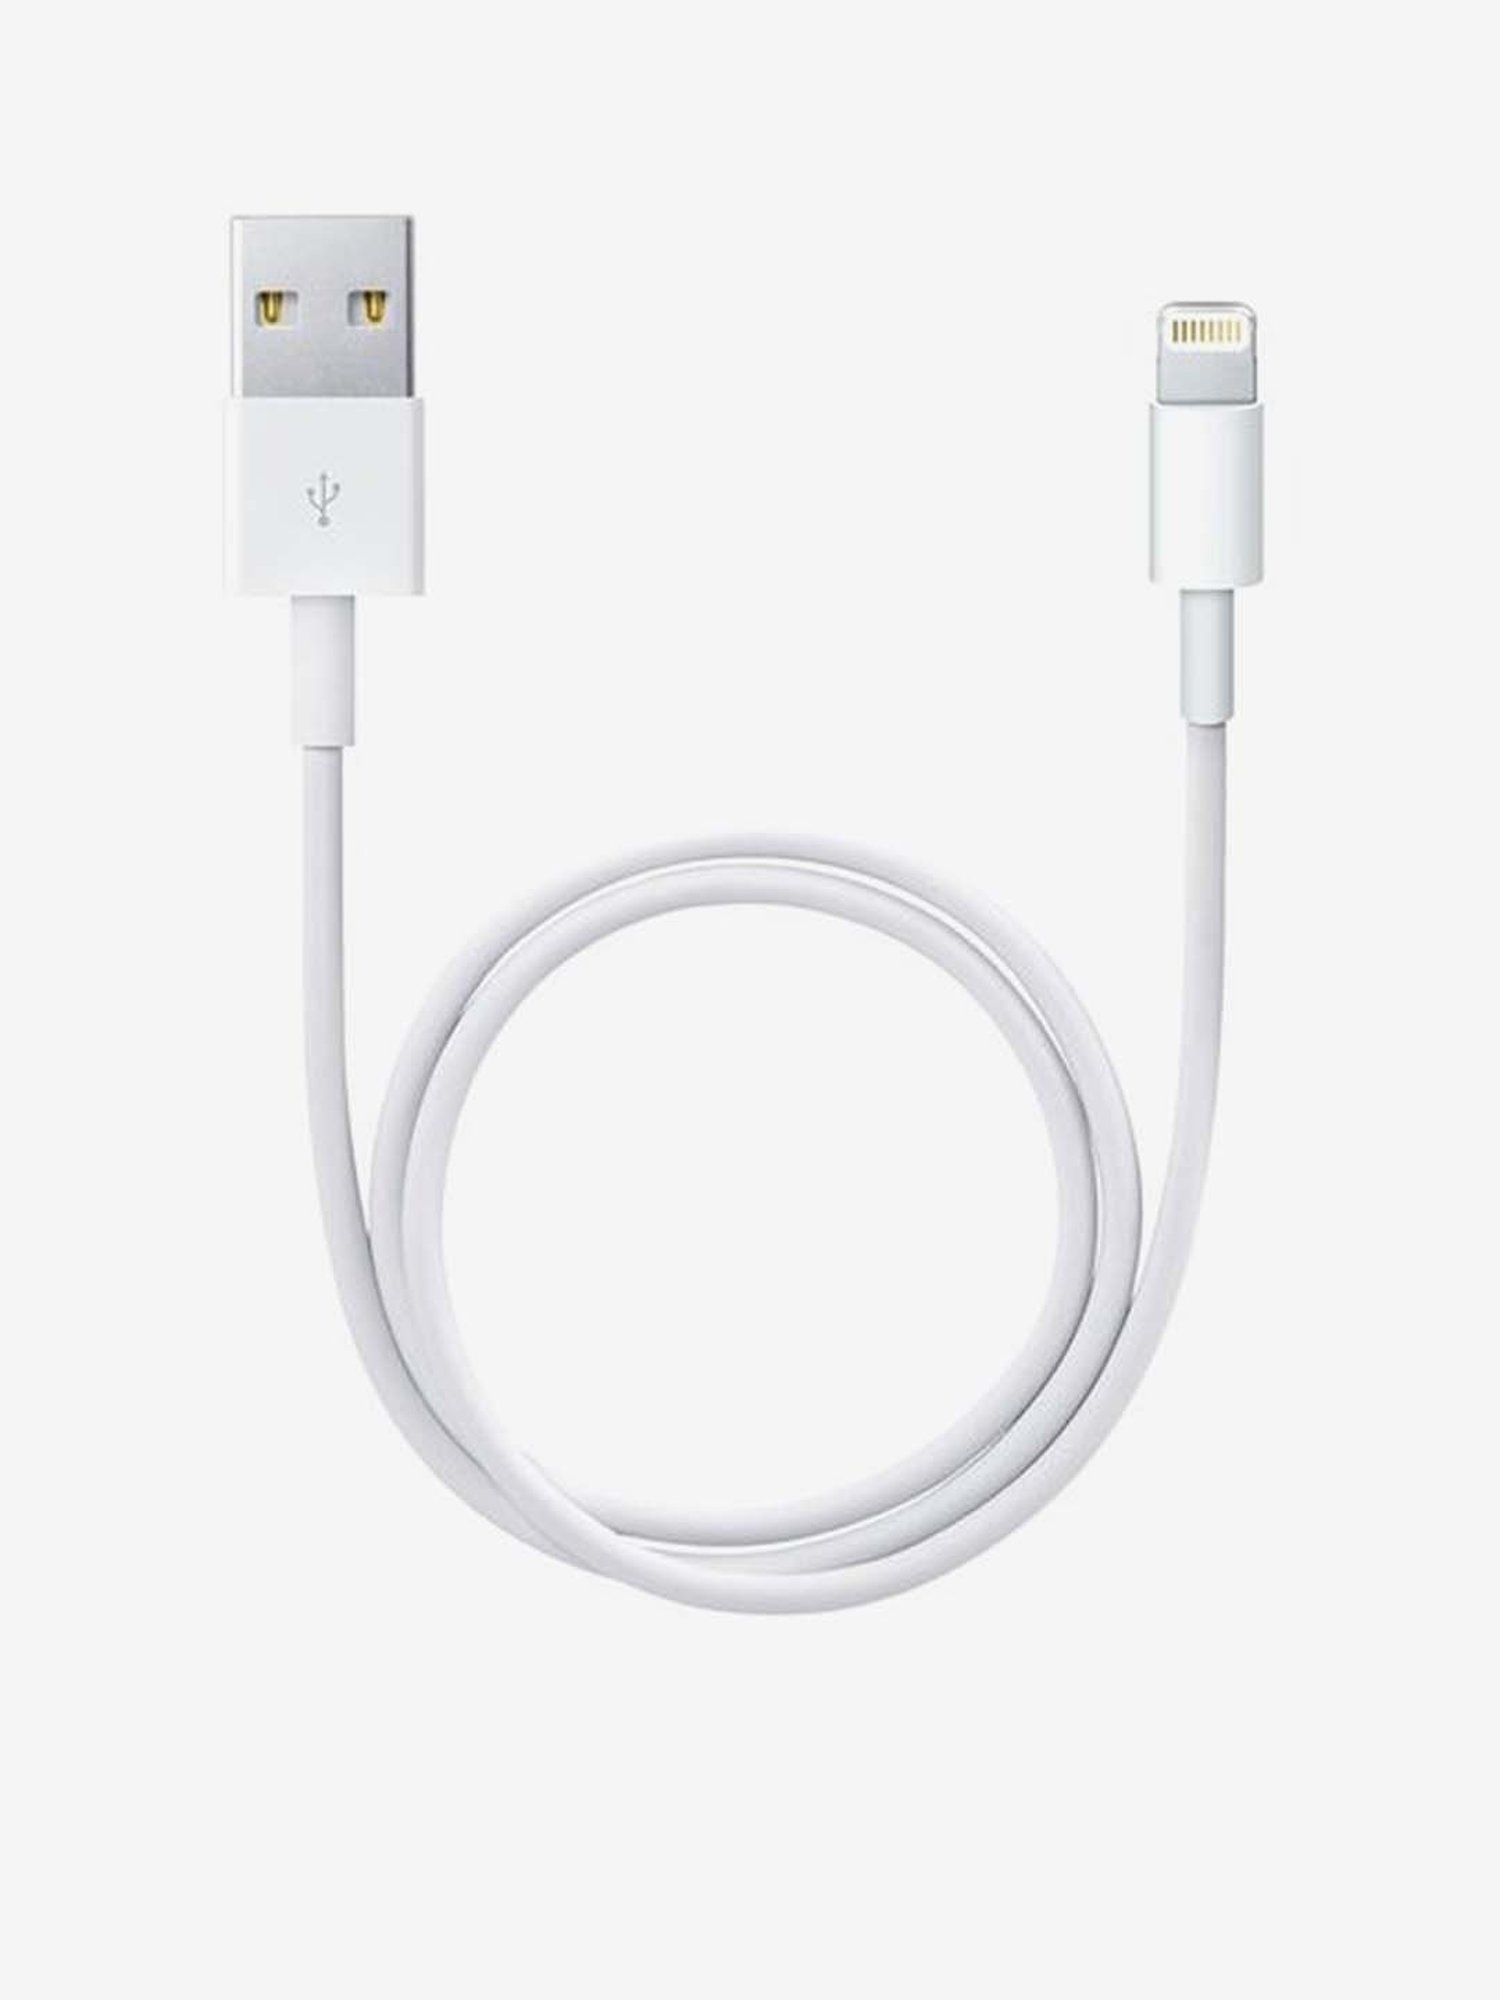 Apple Lightning to USB Cable (1m) - White